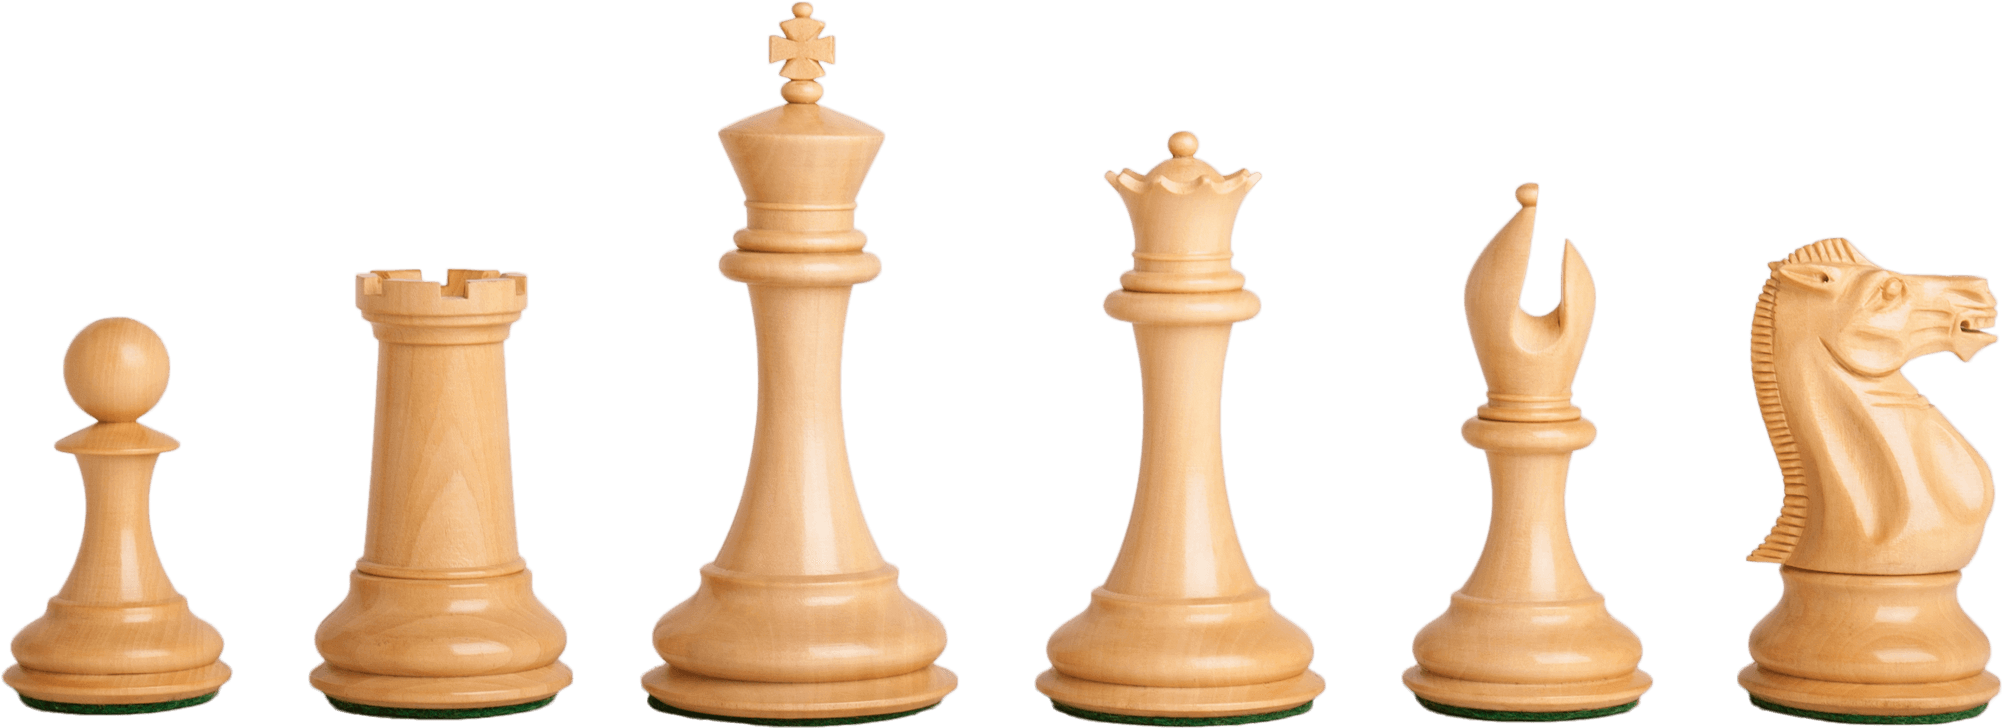 A Close-up Of A Chess Piece